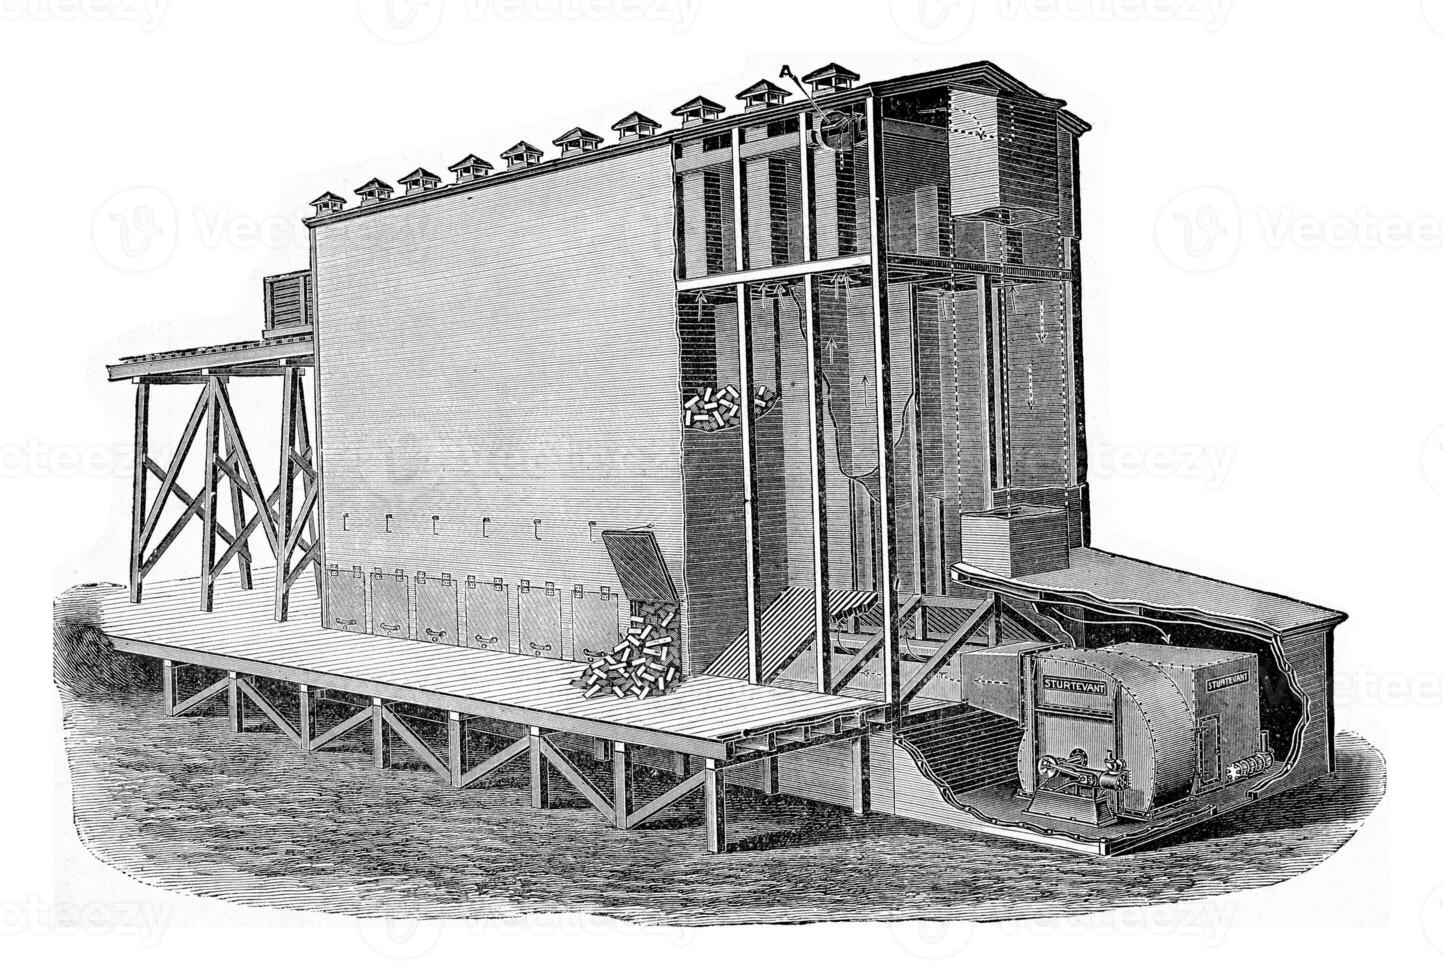 Another device for the progressive drying of wood Systeme Sturtevant, vintage engraving. photo